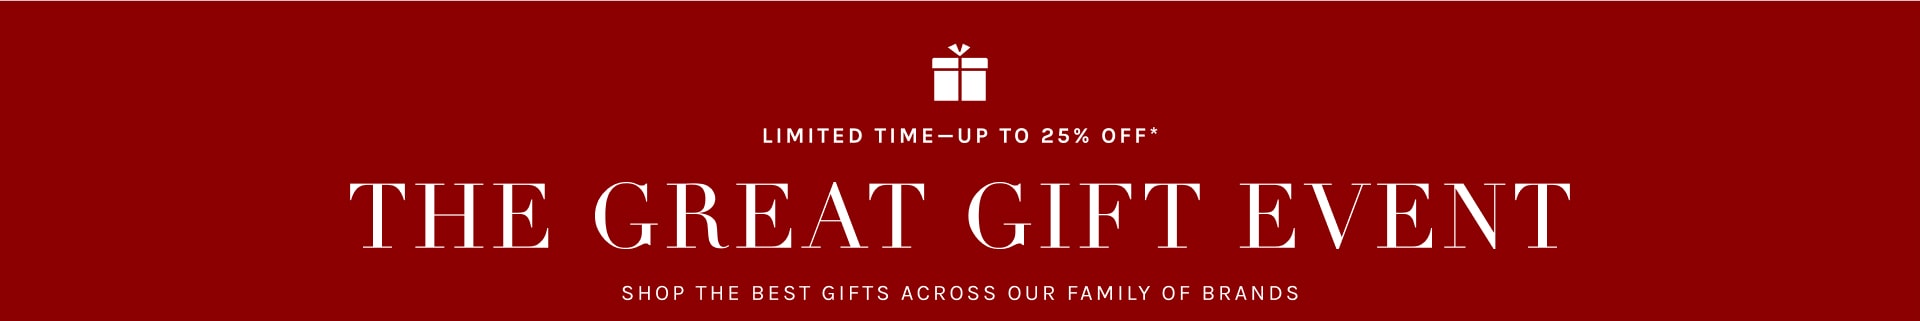 The Great Gift Event – Limited Time!